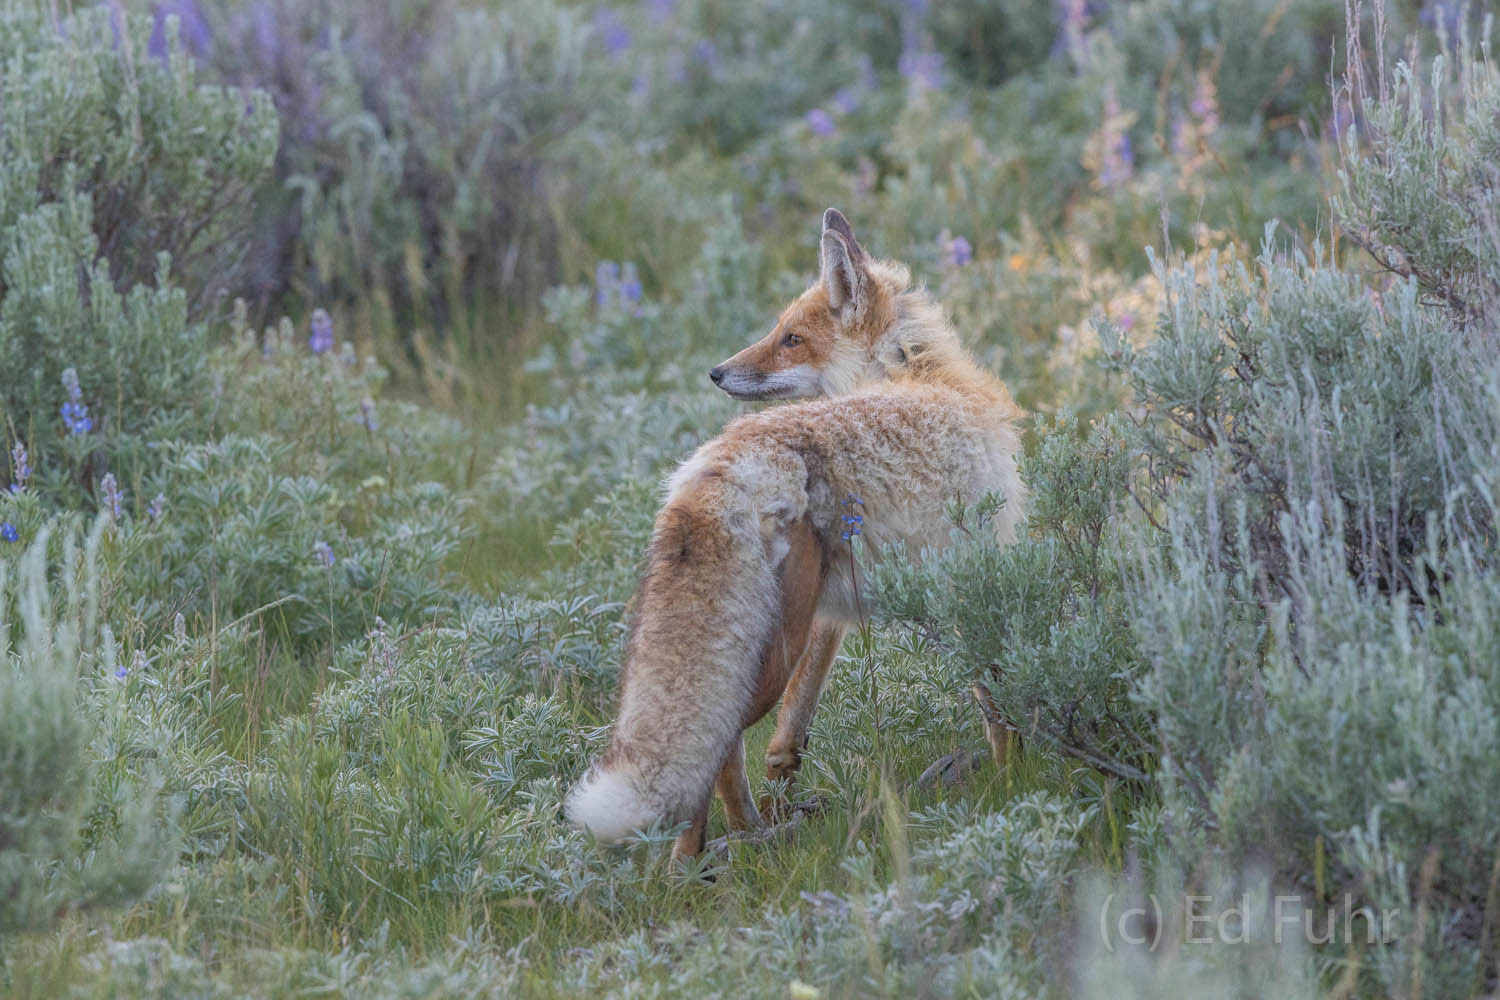 A female fox hunts for food to feed her young kits.